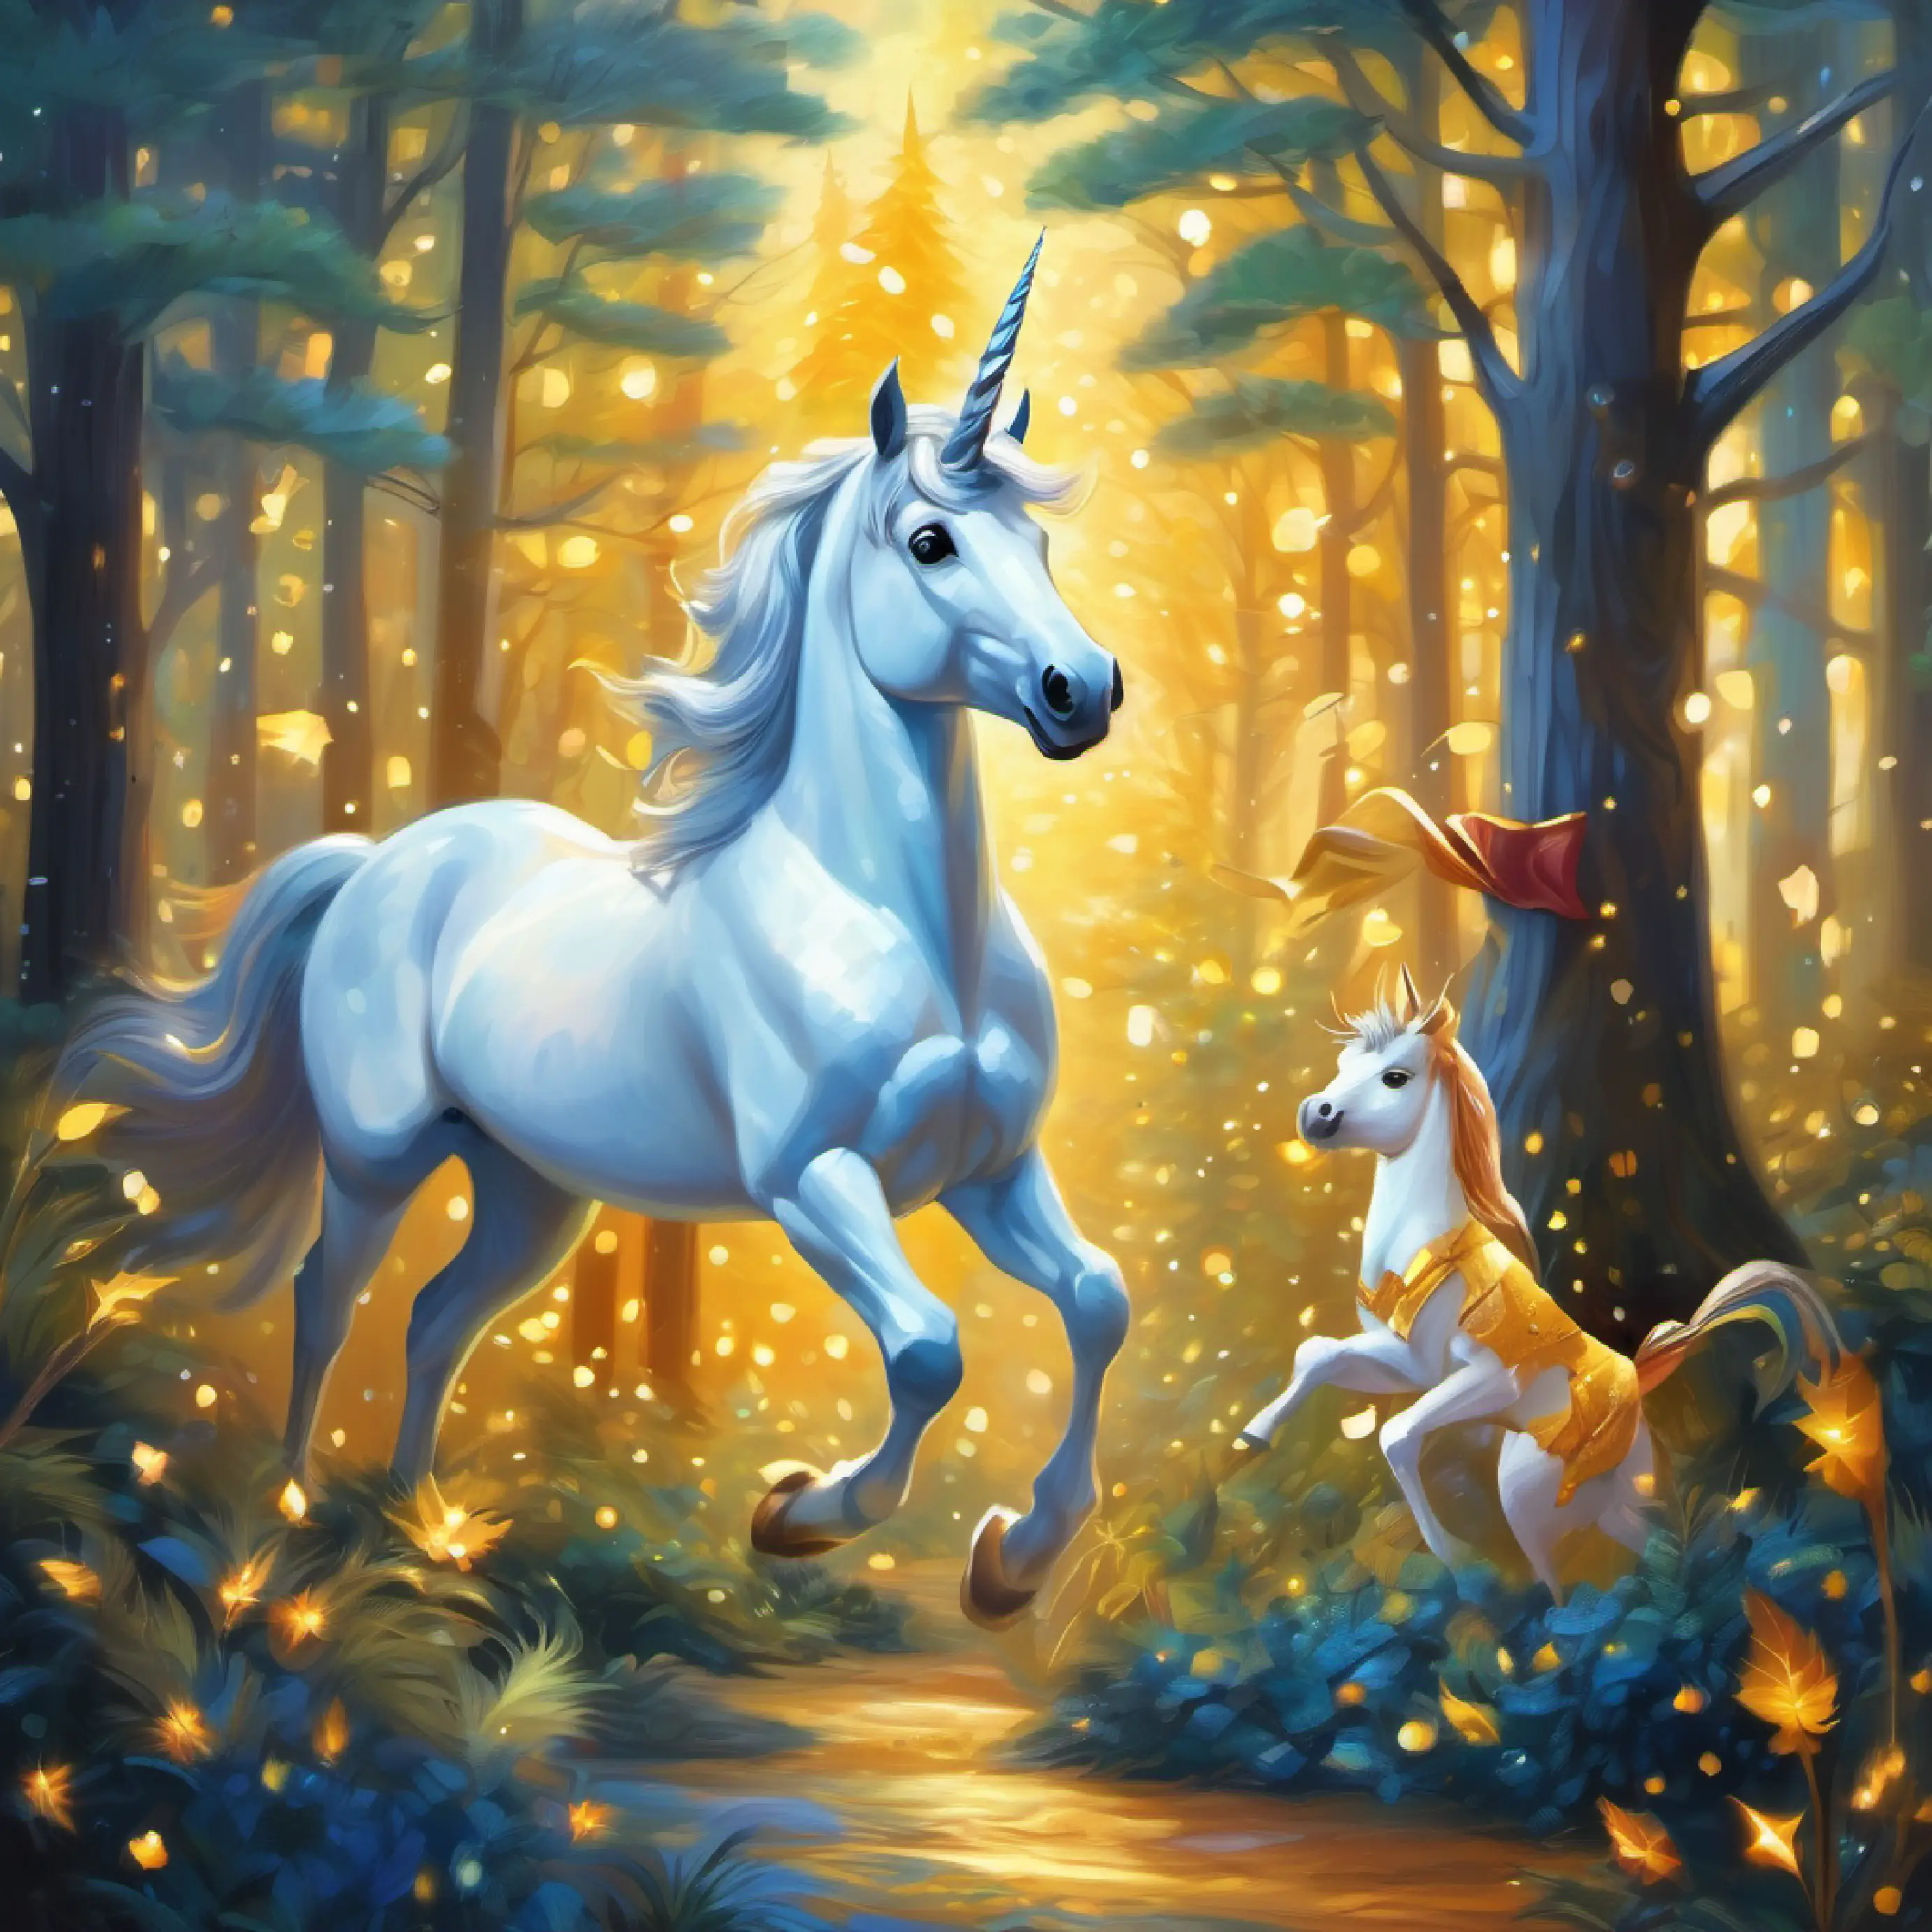 The forest creatures recognize and appreciate Young unicorn, golden hoof, stardust trail, eyes reflecting bravery's unique talent.